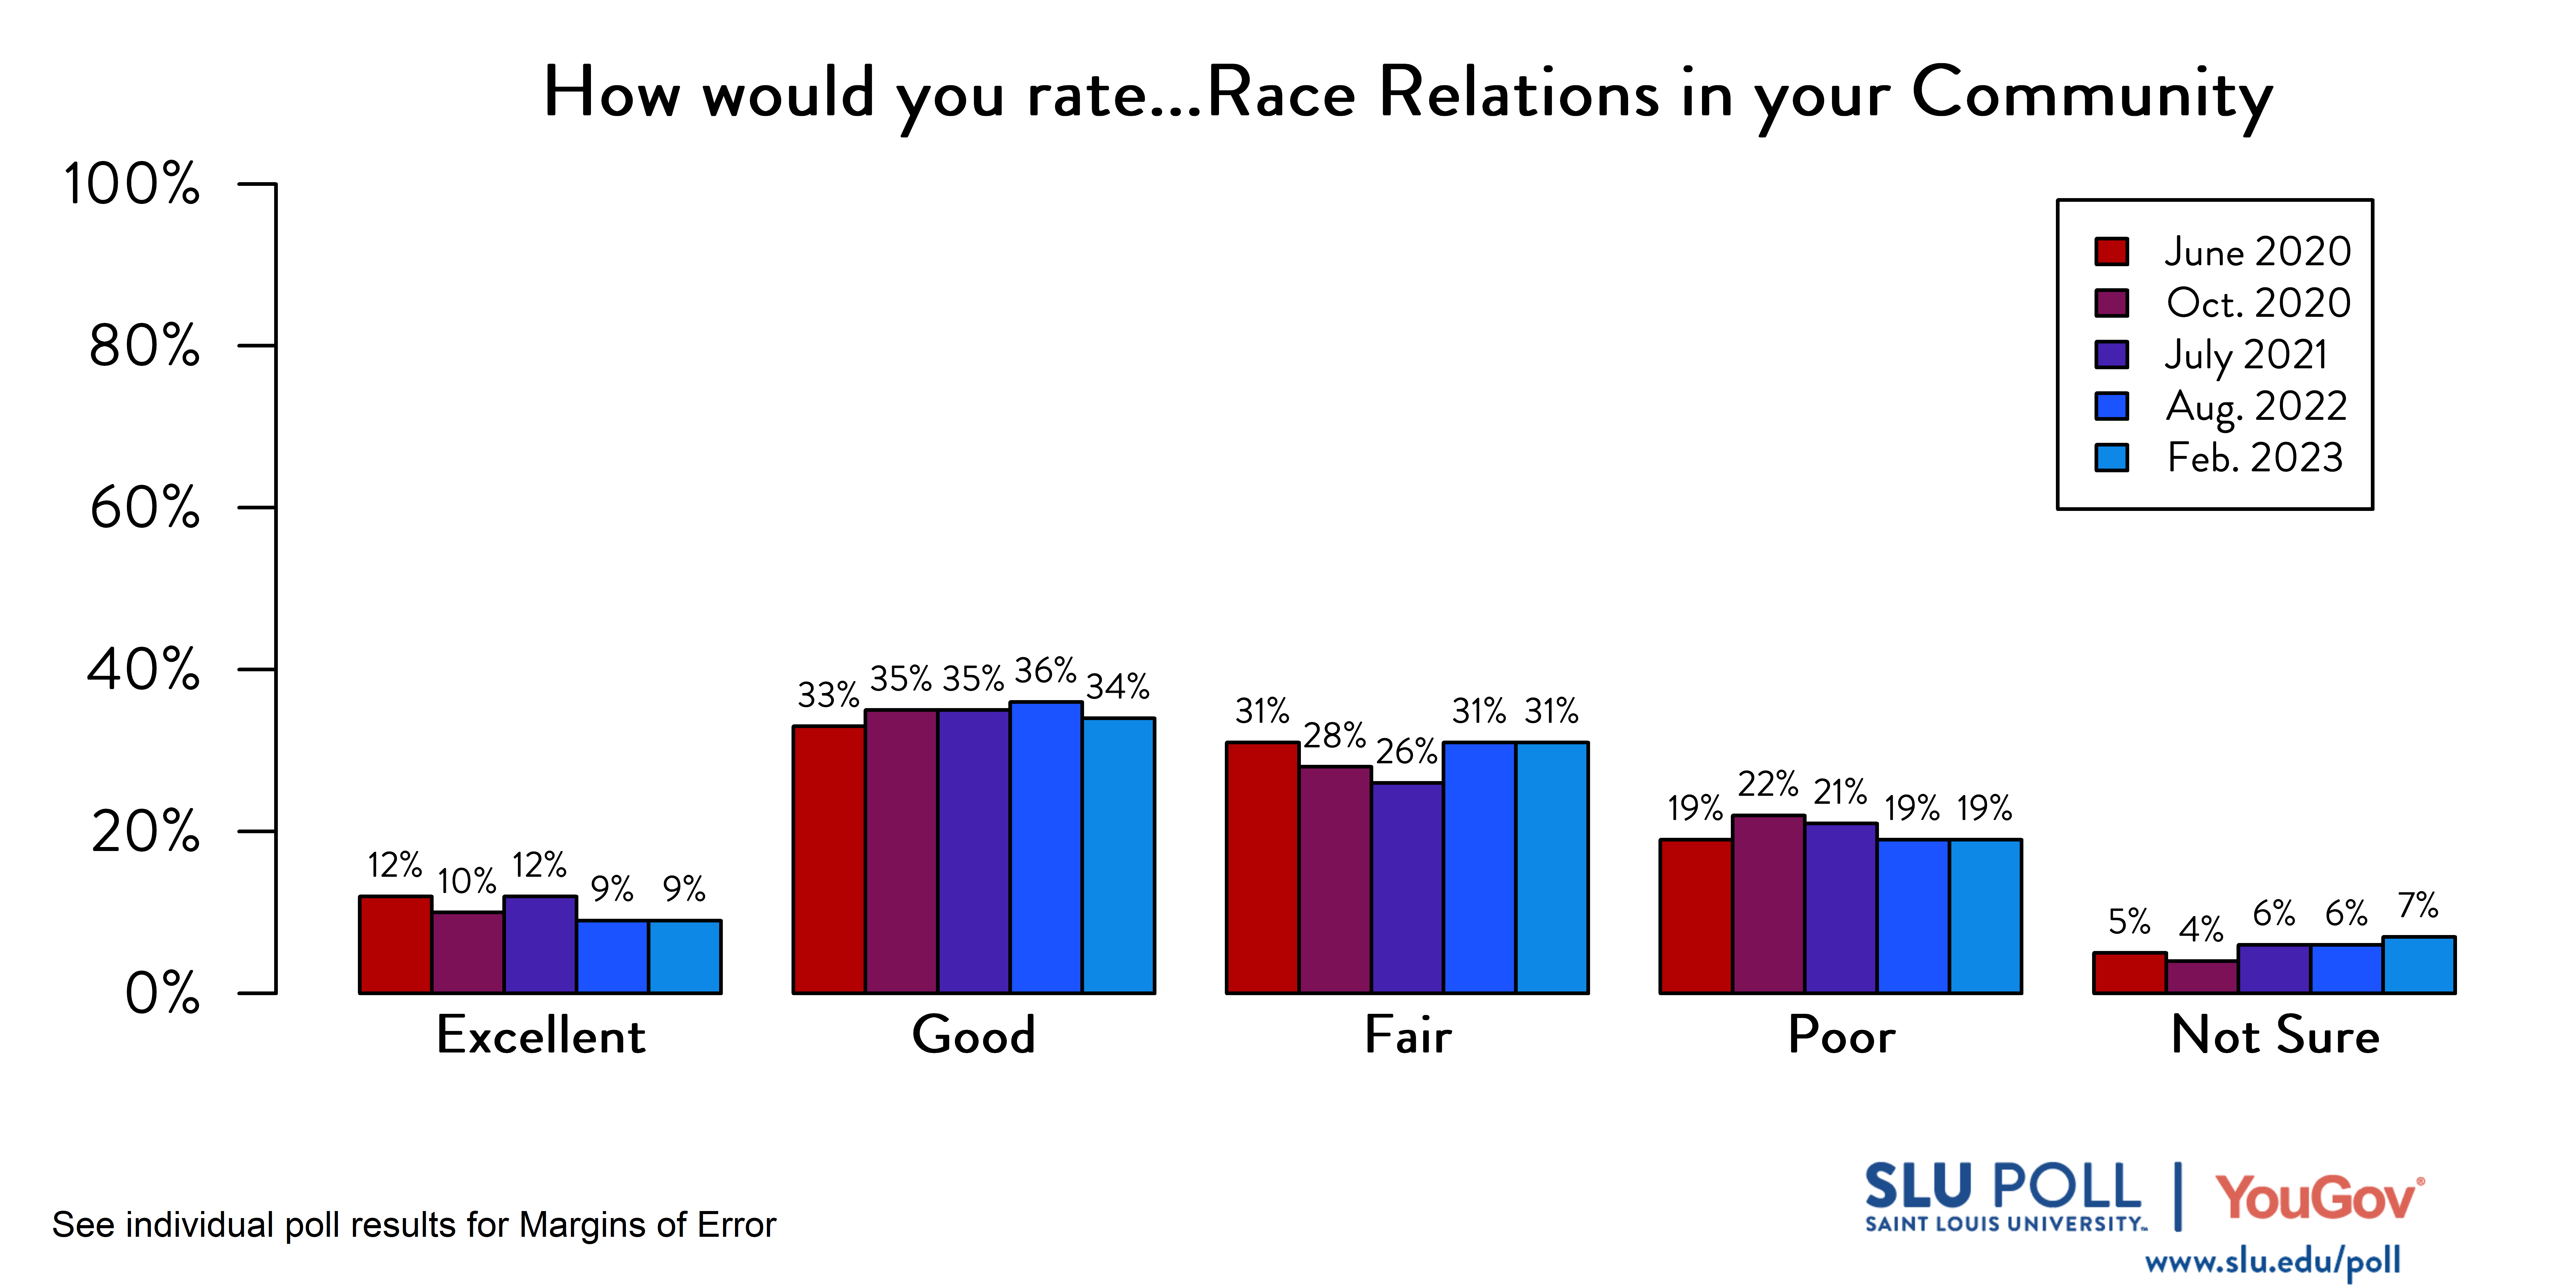 Likely voters' responses to 'How would you rate the condition of the following: Race relations in your community?'. June 2020 Voter Responses 12% Excellent, 33% Good, 31% Fair, 19% Poor, and 5% Not Sure. October 2020 Voter Responses: 10% Excellent, 35% Good, 28% Fair, 22% Poor, and 4% Not sure. July 2021 Voter Responses: 12% Excellent, 35% Good, 26% Fair, 21% Poor, and 6% Not sure. August 2022 Voter Responses: 9% Excellent, 36% Good, 31% Fair, 19% Poor, and 6% Not sure. February 2023 Voter Responses: 9% Excellent, 34% Good, 31% Fair, 19% Poor, and 7% Not sure.